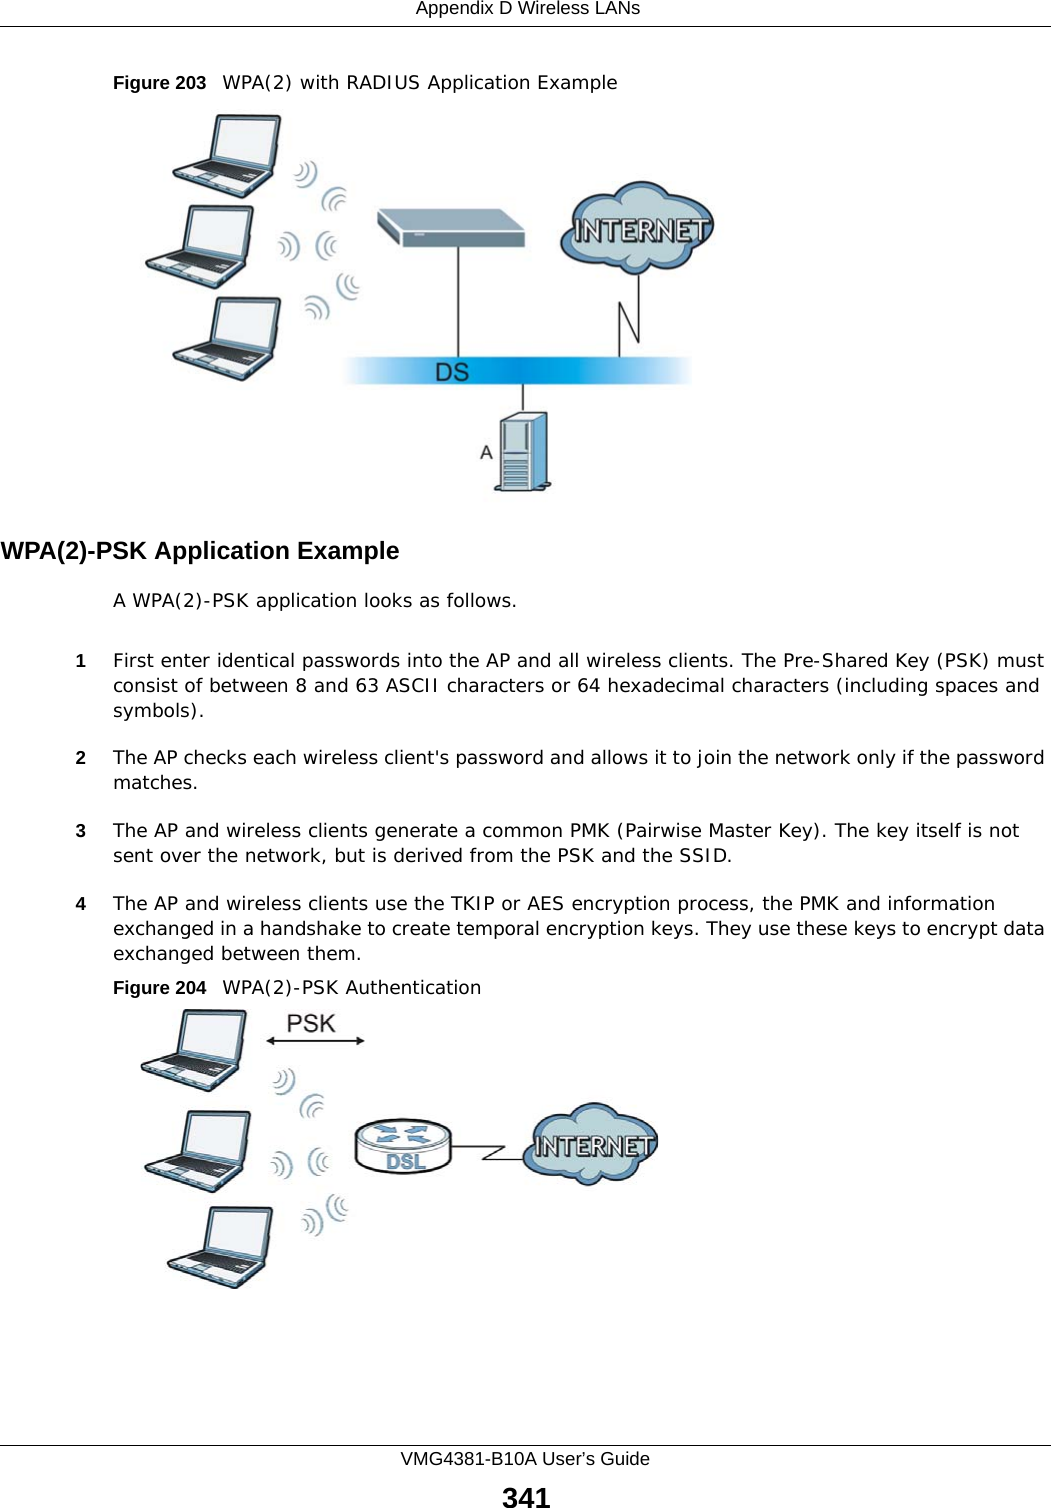  Appendix D Wireless LANsVMG4381-B10A User’s Guide341Figure 203   WPA(2) with RADIUS Application ExampleWPA(2)-PSK Application ExampleA WPA(2)-PSK application looks as follows.1First enter identical passwords into the AP and all wireless clients. The Pre-Shared Key (PSK) must consist of between 8 and 63 ASCII characters or 64 hexadecimal characters (including spaces and symbols).2The AP checks each wireless client&apos;s password and allows it to join the network only if the password matches.3The AP and wireless clients generate a common PMK (Pairwise Master Key). The key itself is not sent over the network, but is derived from the PSK and the SSID. 4The AP and wireless clients use the TKIP or AES encryption process, the PMK and information exchanged in a handshake to create temporal encryption keys. They use these keys to encrypt data exchanged between them.Figure 204   WPA(2)-PSK Authentication